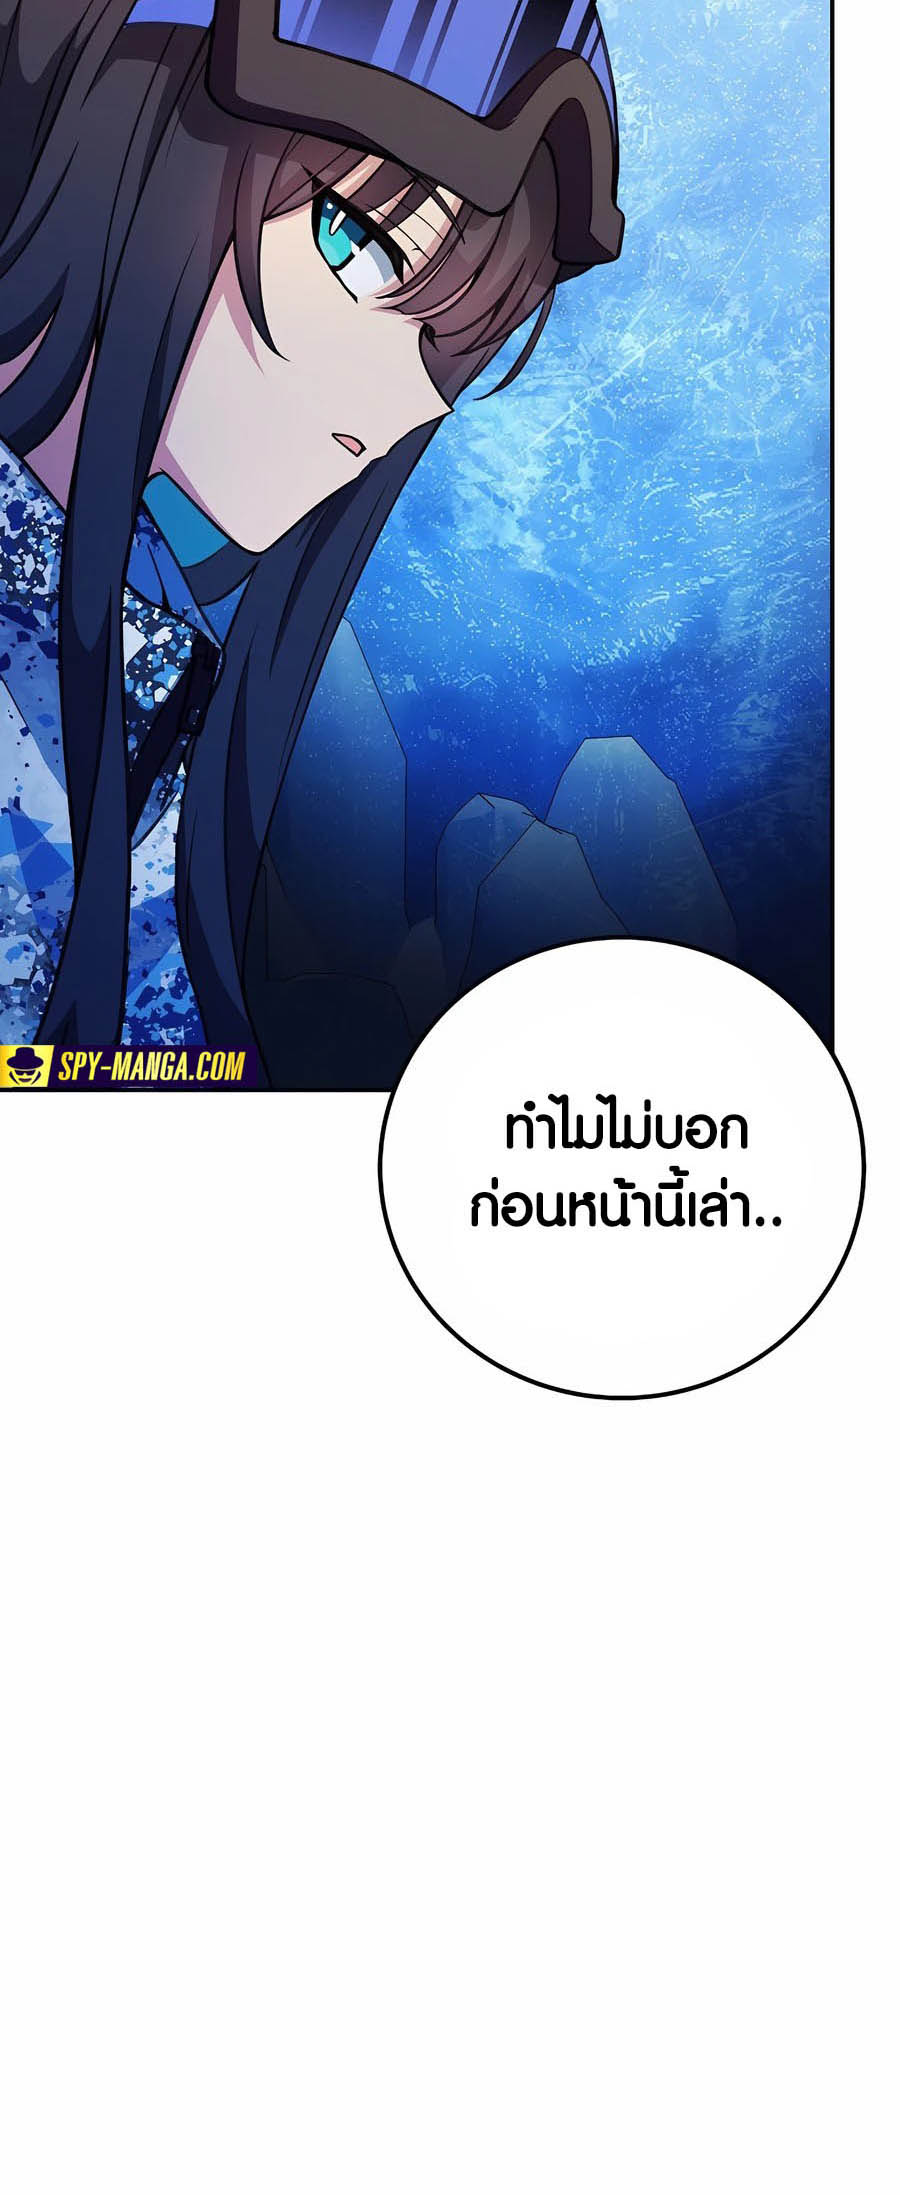 à¸­à¹ˆà¸²à¸™à¸¡à¸±à¸™à¸®à¸§à¸² à¹€à¸£à¸·à¹ˆà¸­à¸‡ The Part Time Land of the Gods 57 51